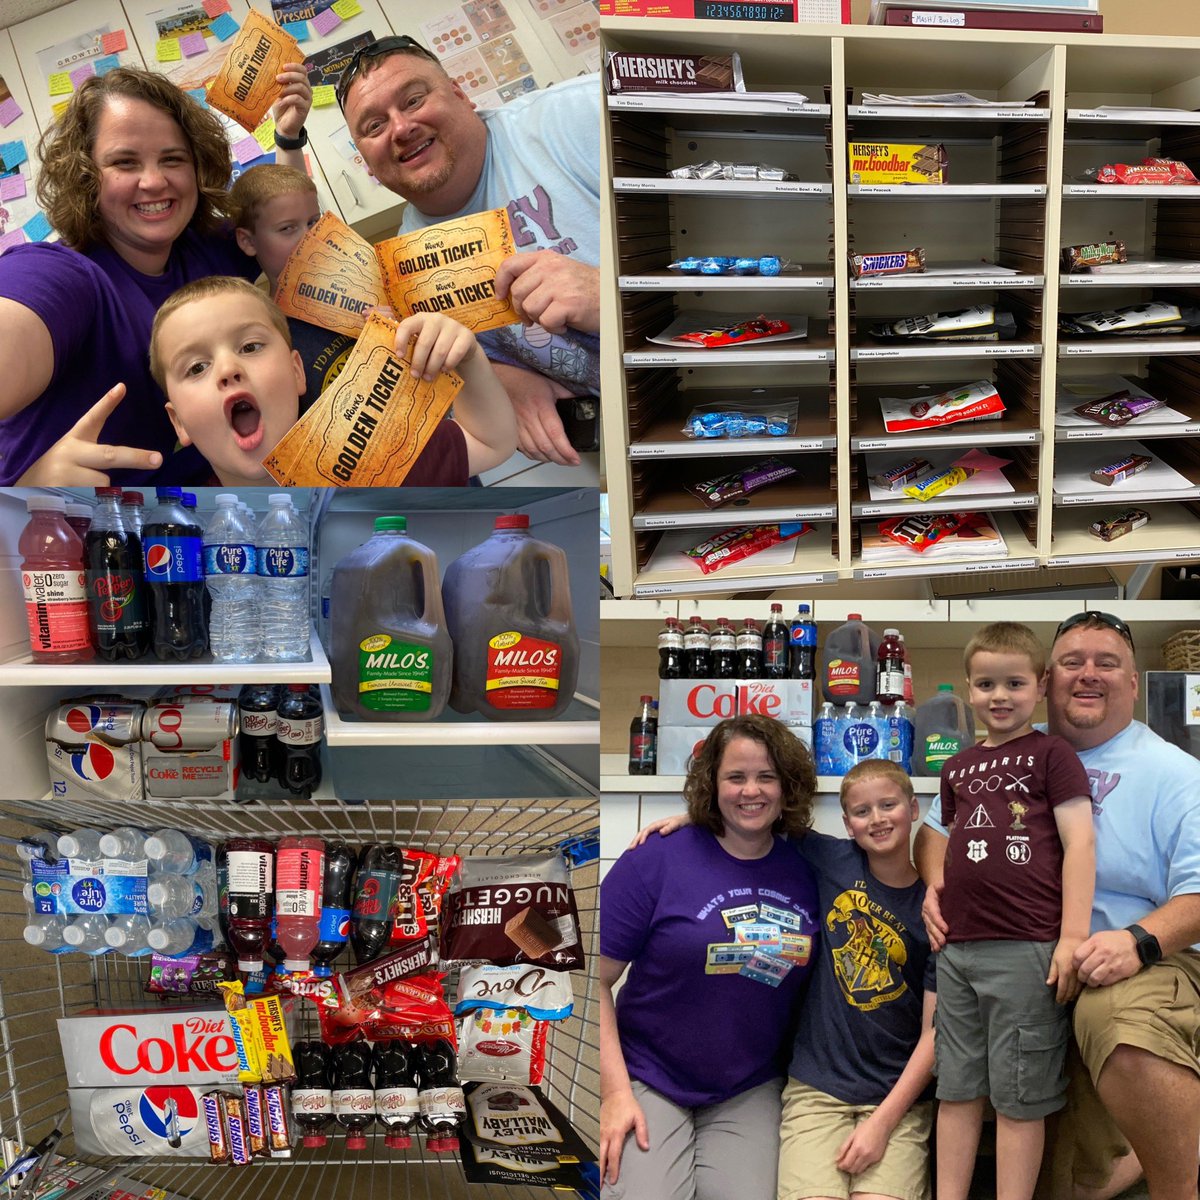 Snacks & Relax➡️ being a principal is a family affair. We stocked the lounge w/ drinks & snacks. We also hid 10 Golden Tickets in the school for 20 min. of extra prep where I will cover recess supervision or classroom. #momsasprincipals #PrincipalOfficeHours #Pitzer2a #LWRockets